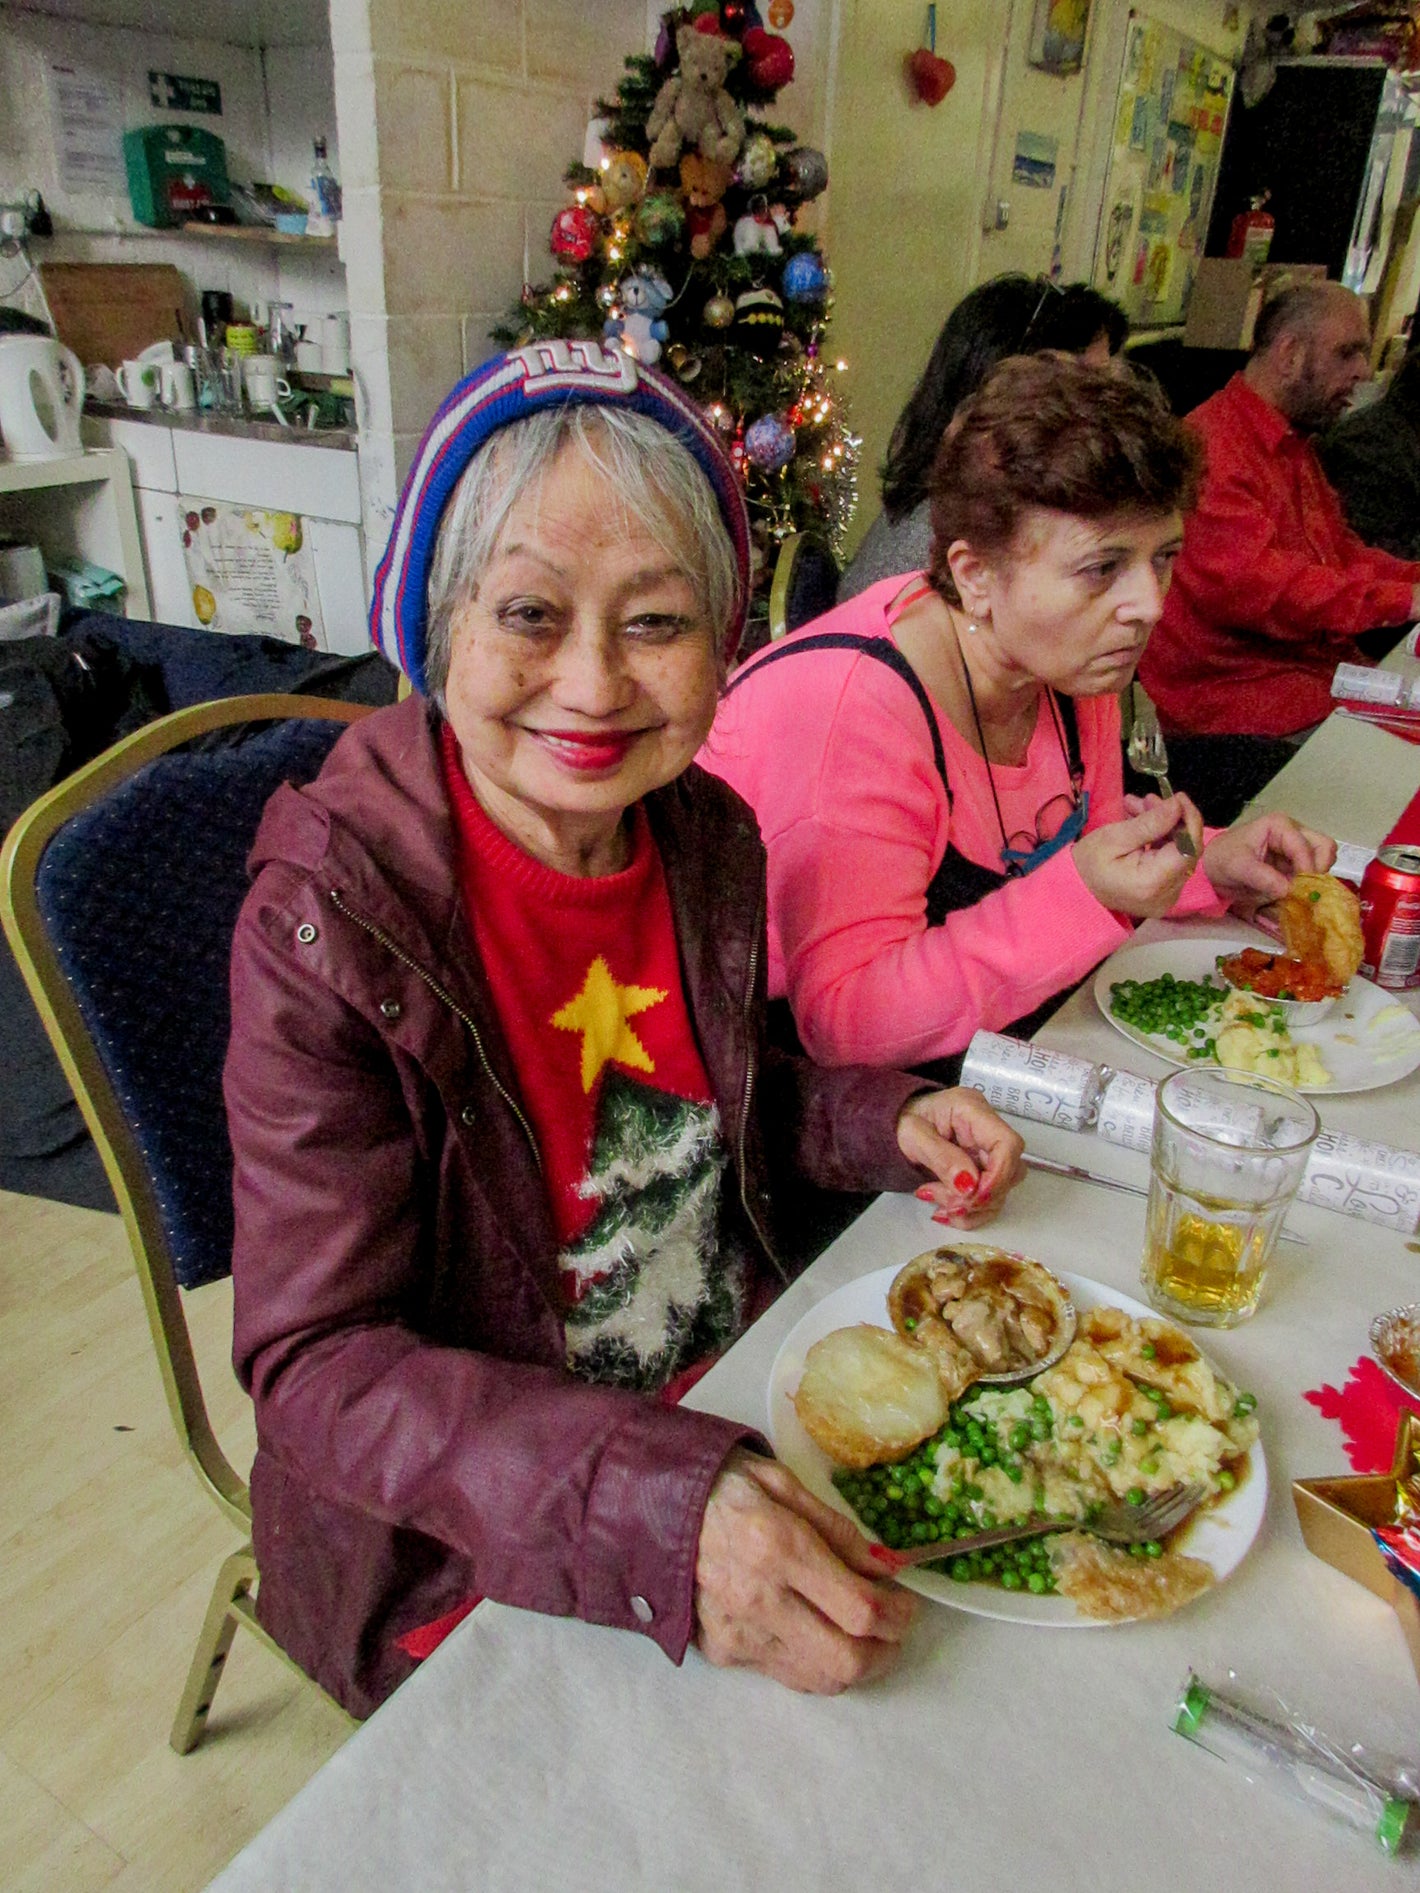 Woman smiling with her Christmas dinner.